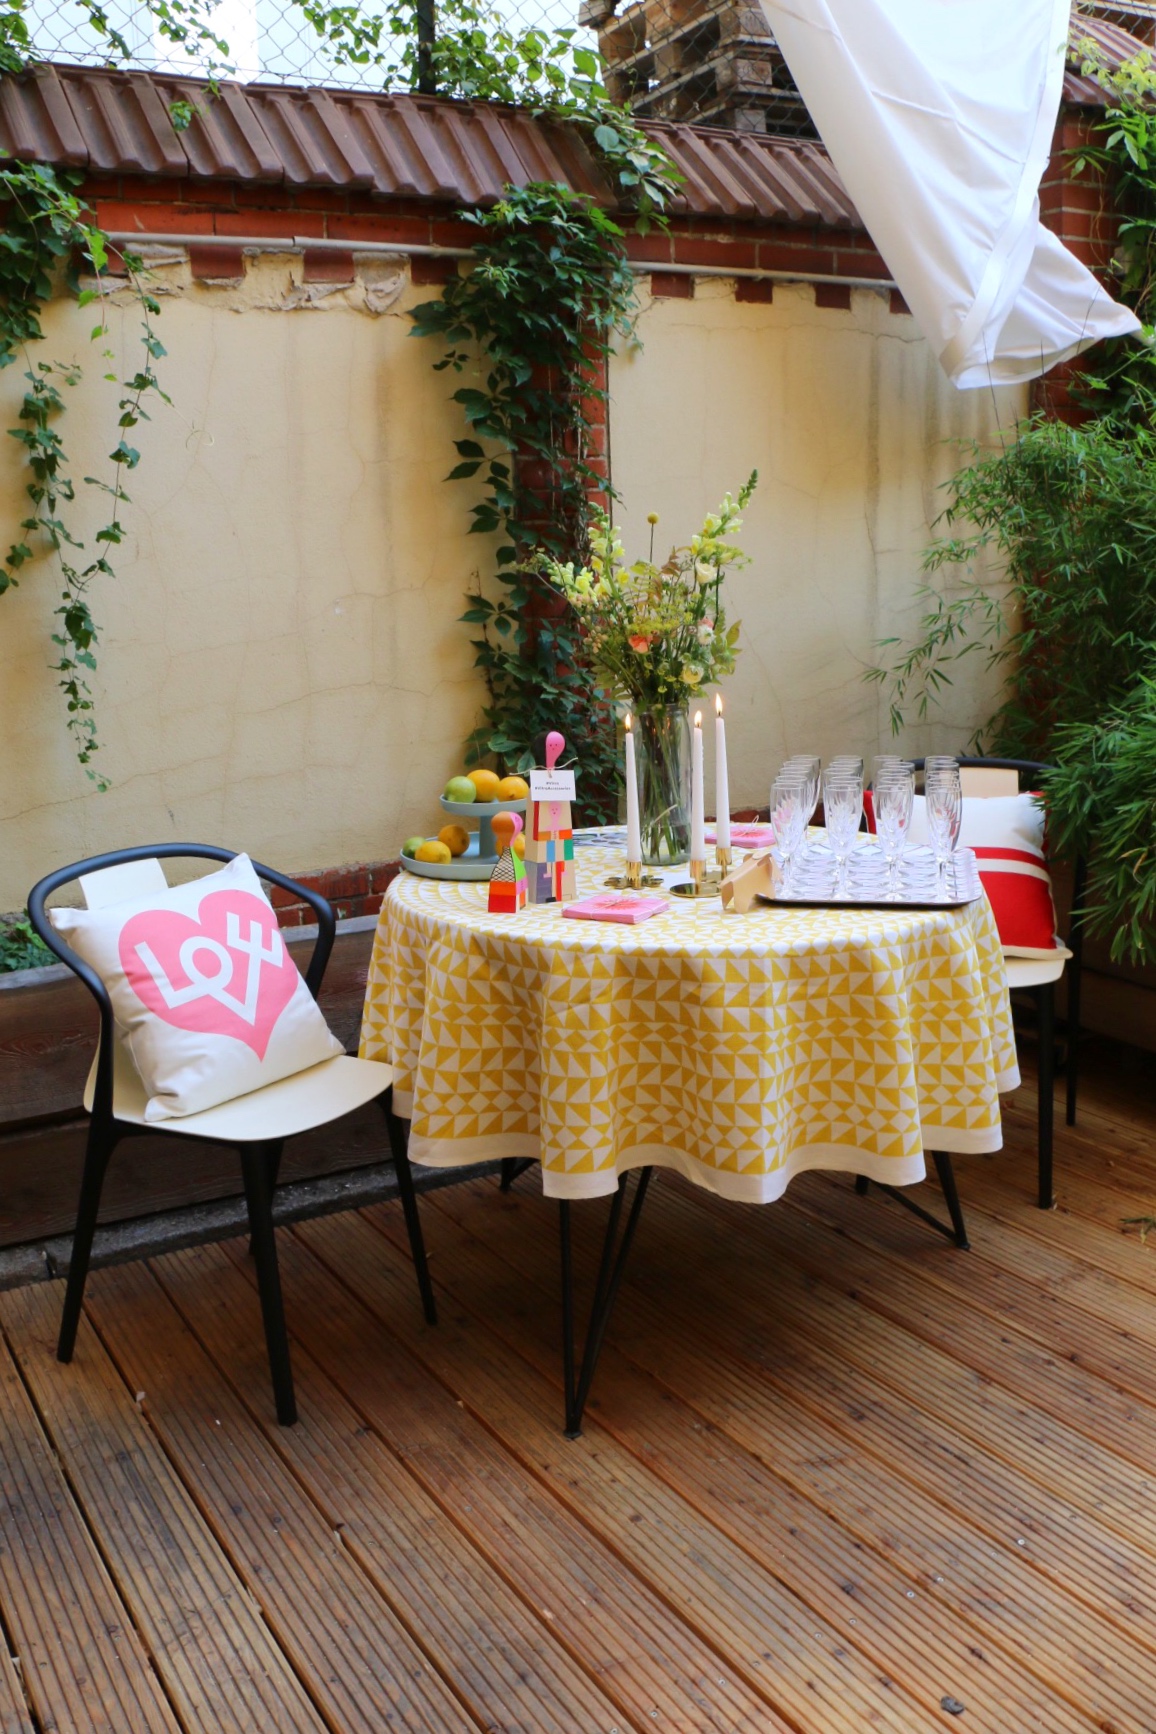 Vitra Home Accessoires - Vitra Summer Dinner in Berlin by eat blog love